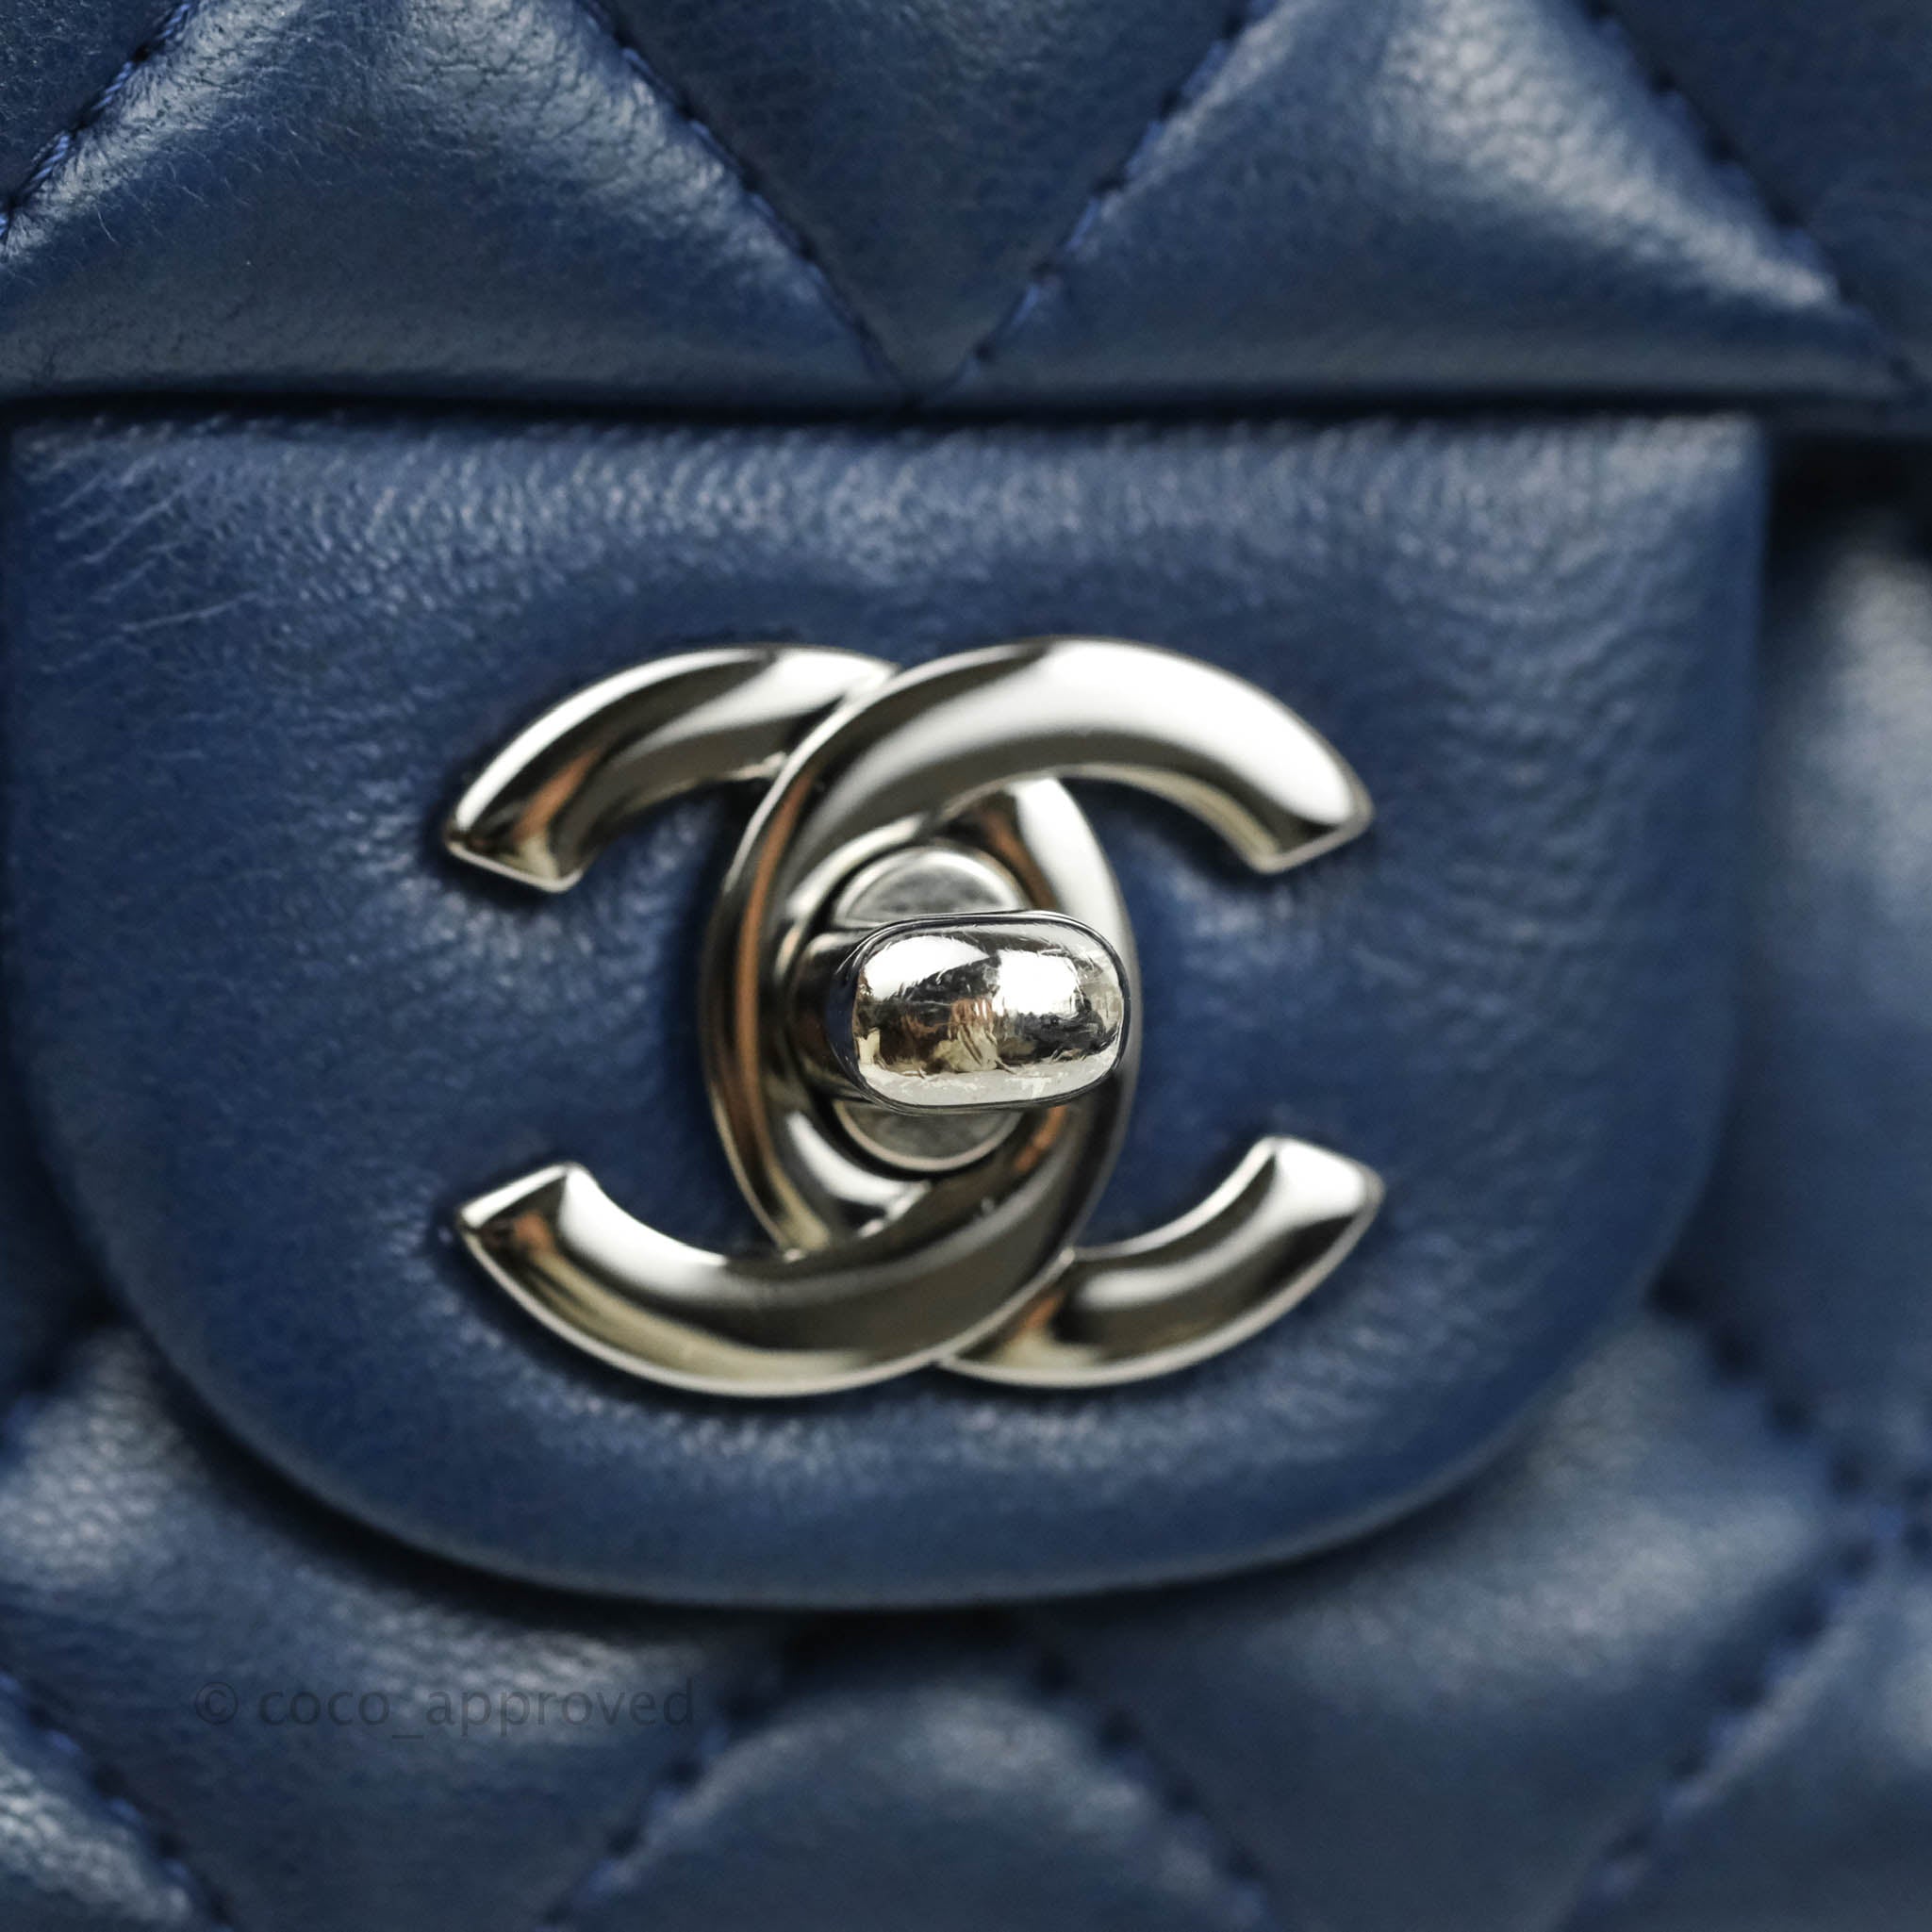 Chanel Mini Navy Blue Quilted Lambskin Rectangular Classic